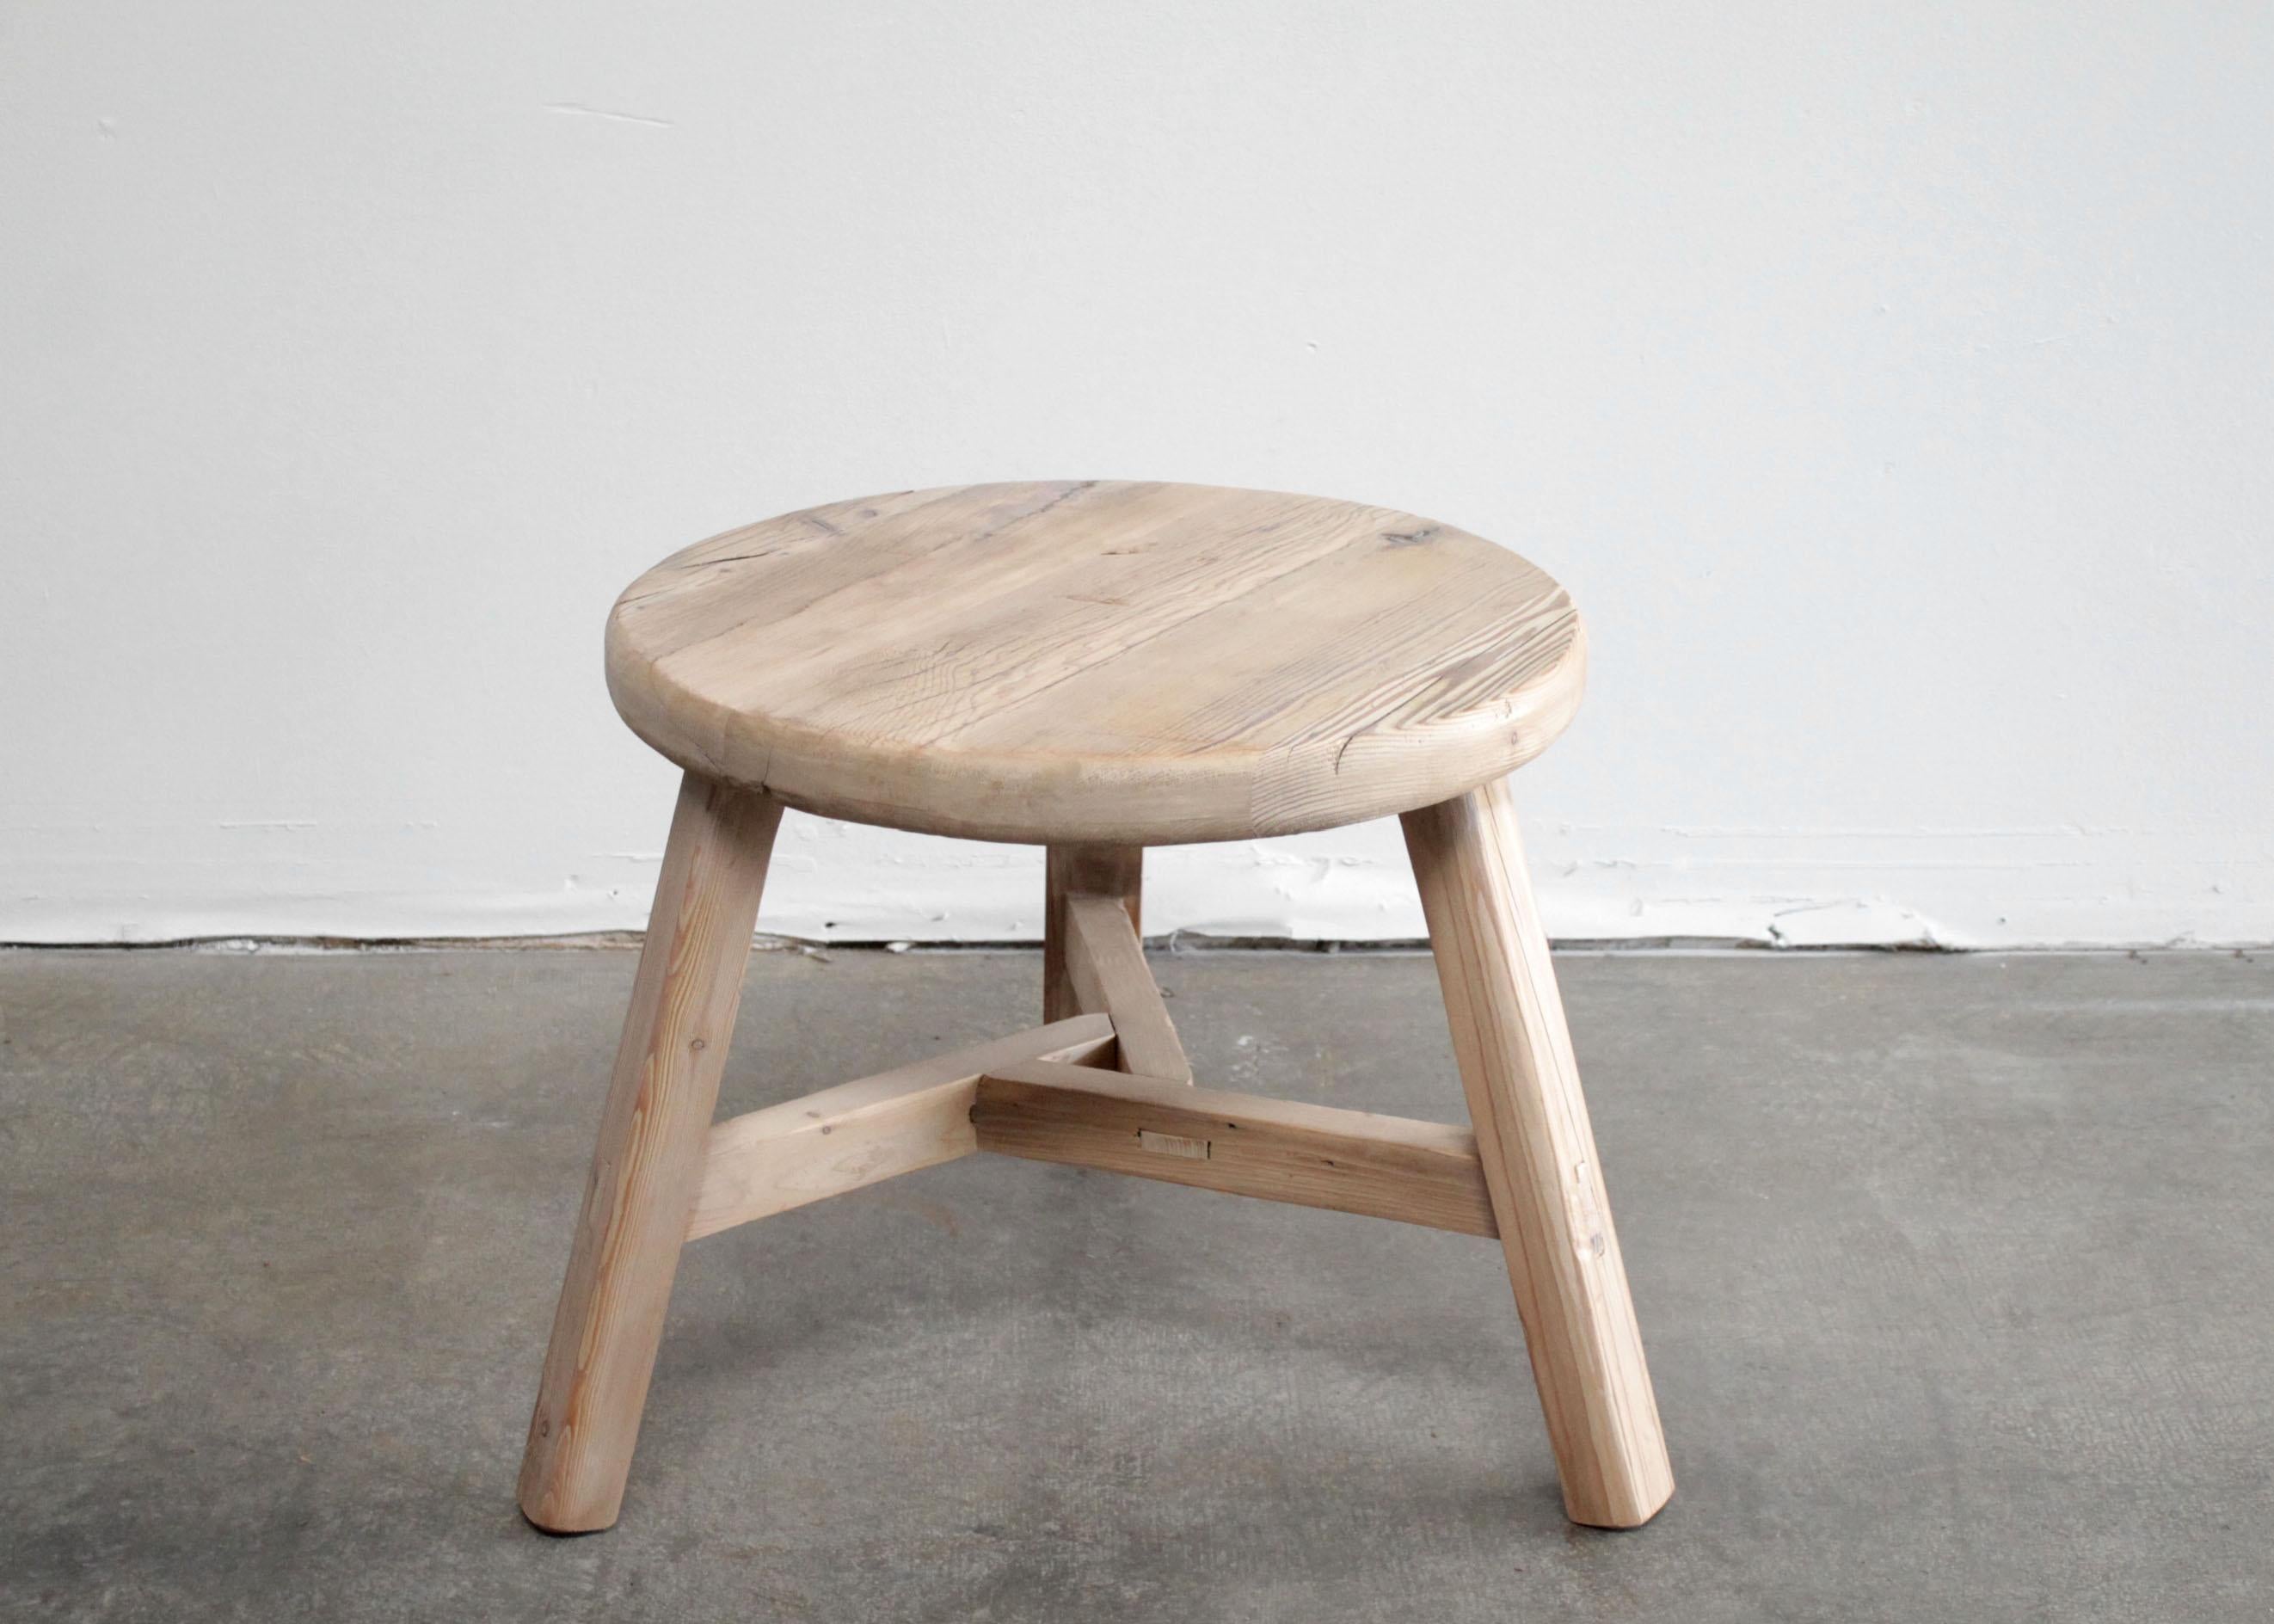 Round natural side table made from reclaimed elmwood raw natural finish, a warm honey with gray tones in the wood. Can be stained or painted for a customized look. Solid and sturdy, a great side table for next to a bed, sofa, chairs.
Size: 24